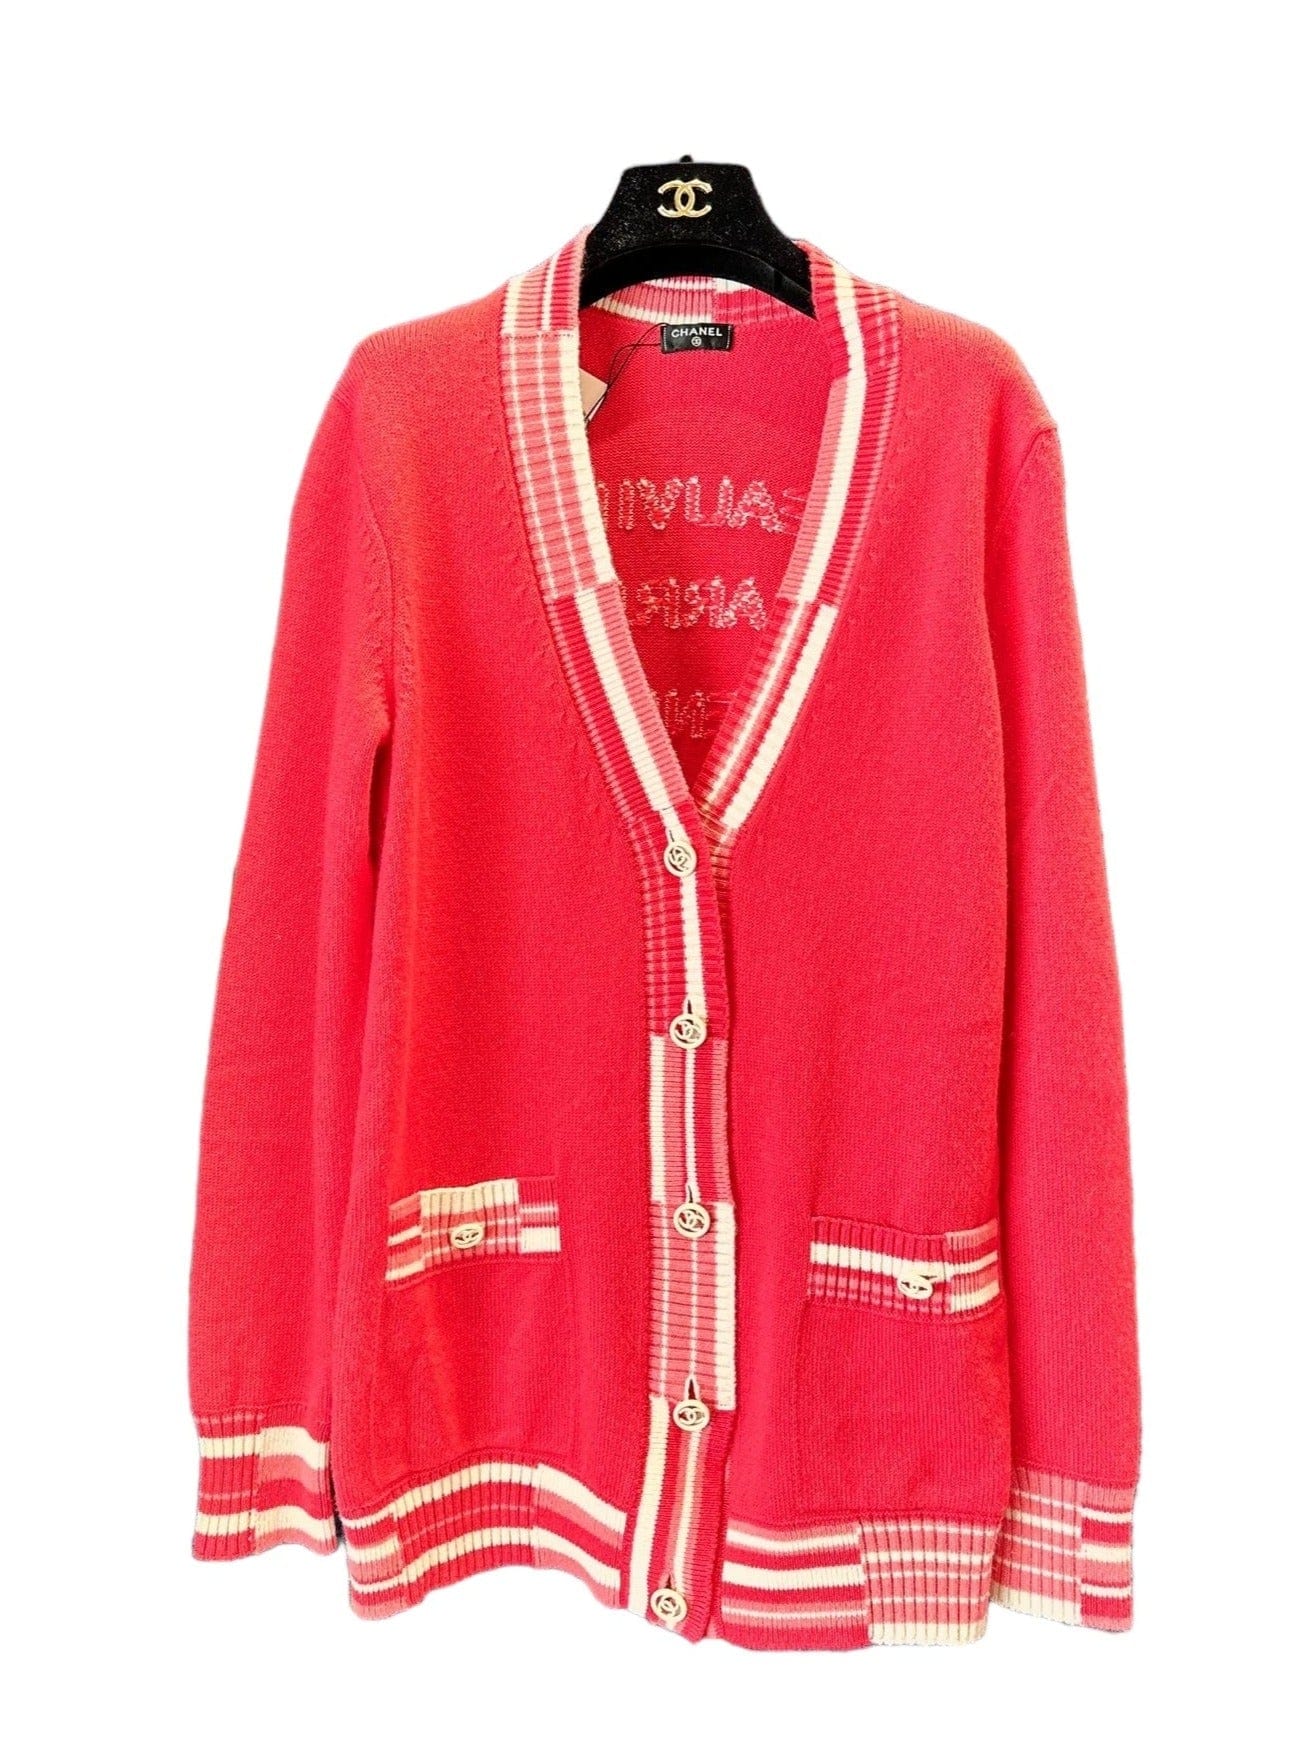 Luxury Promise Chanel Knit Cashmere Red Cardi